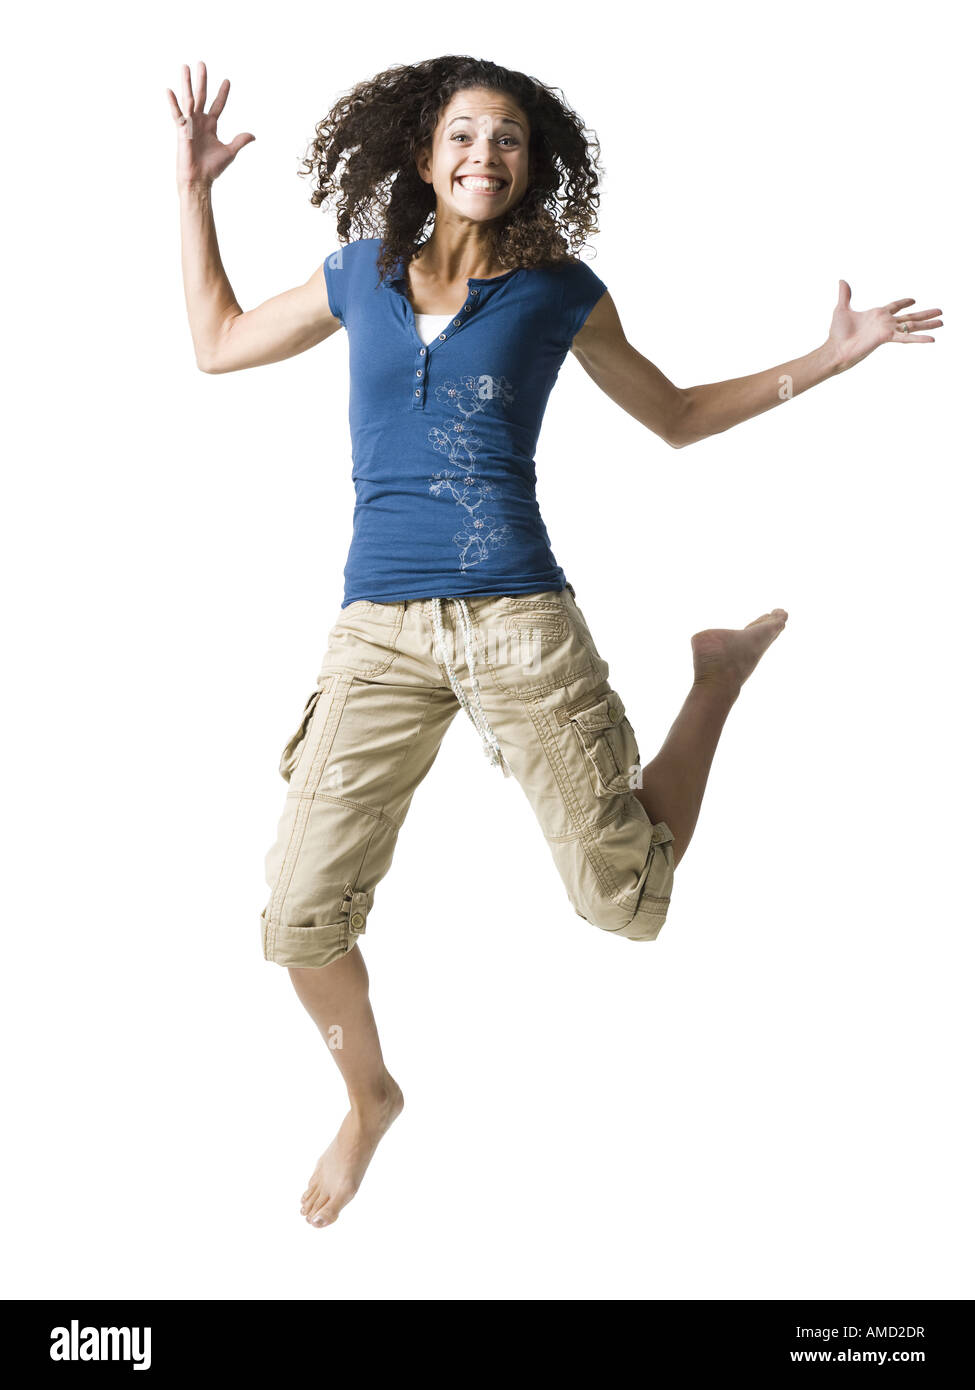 Teenage girl leaping and smiling Banque D'Images